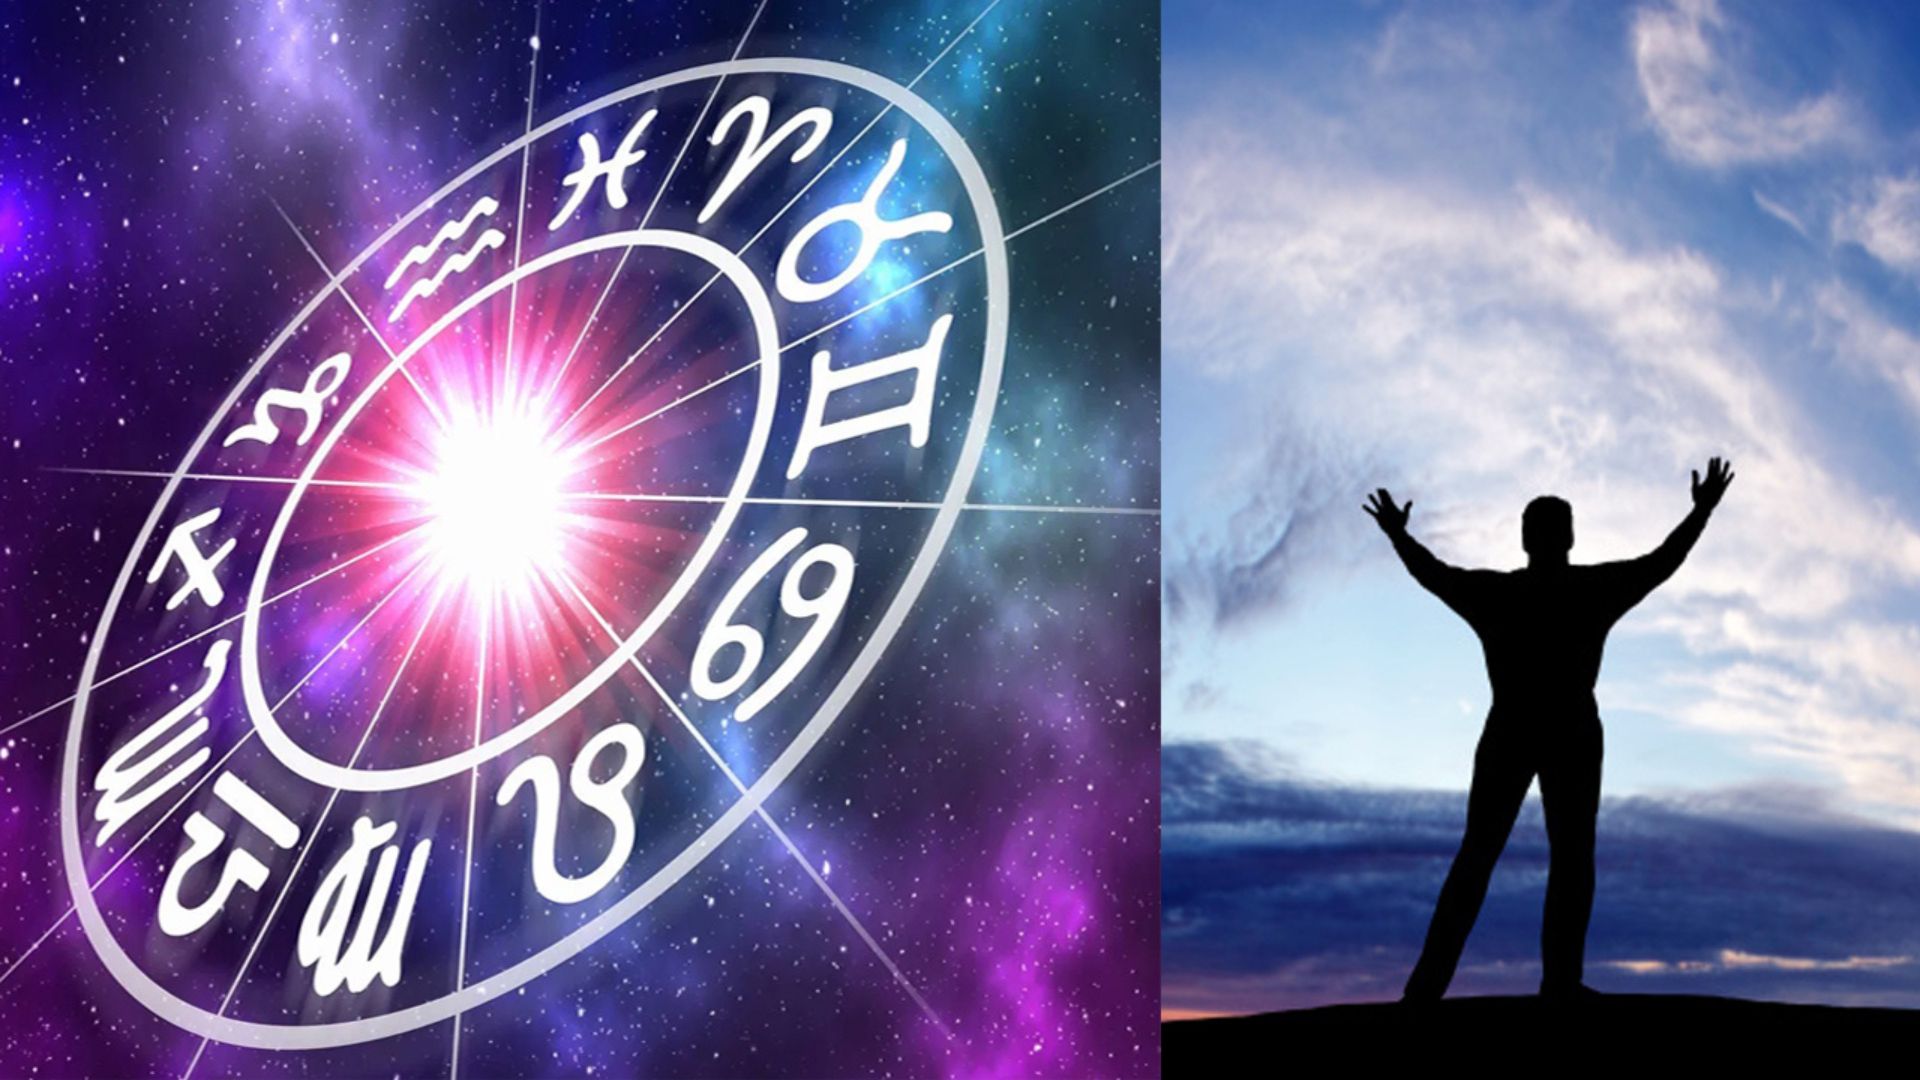 Man With Raised Arms Looking To The Sky, zodiac signs in a circle